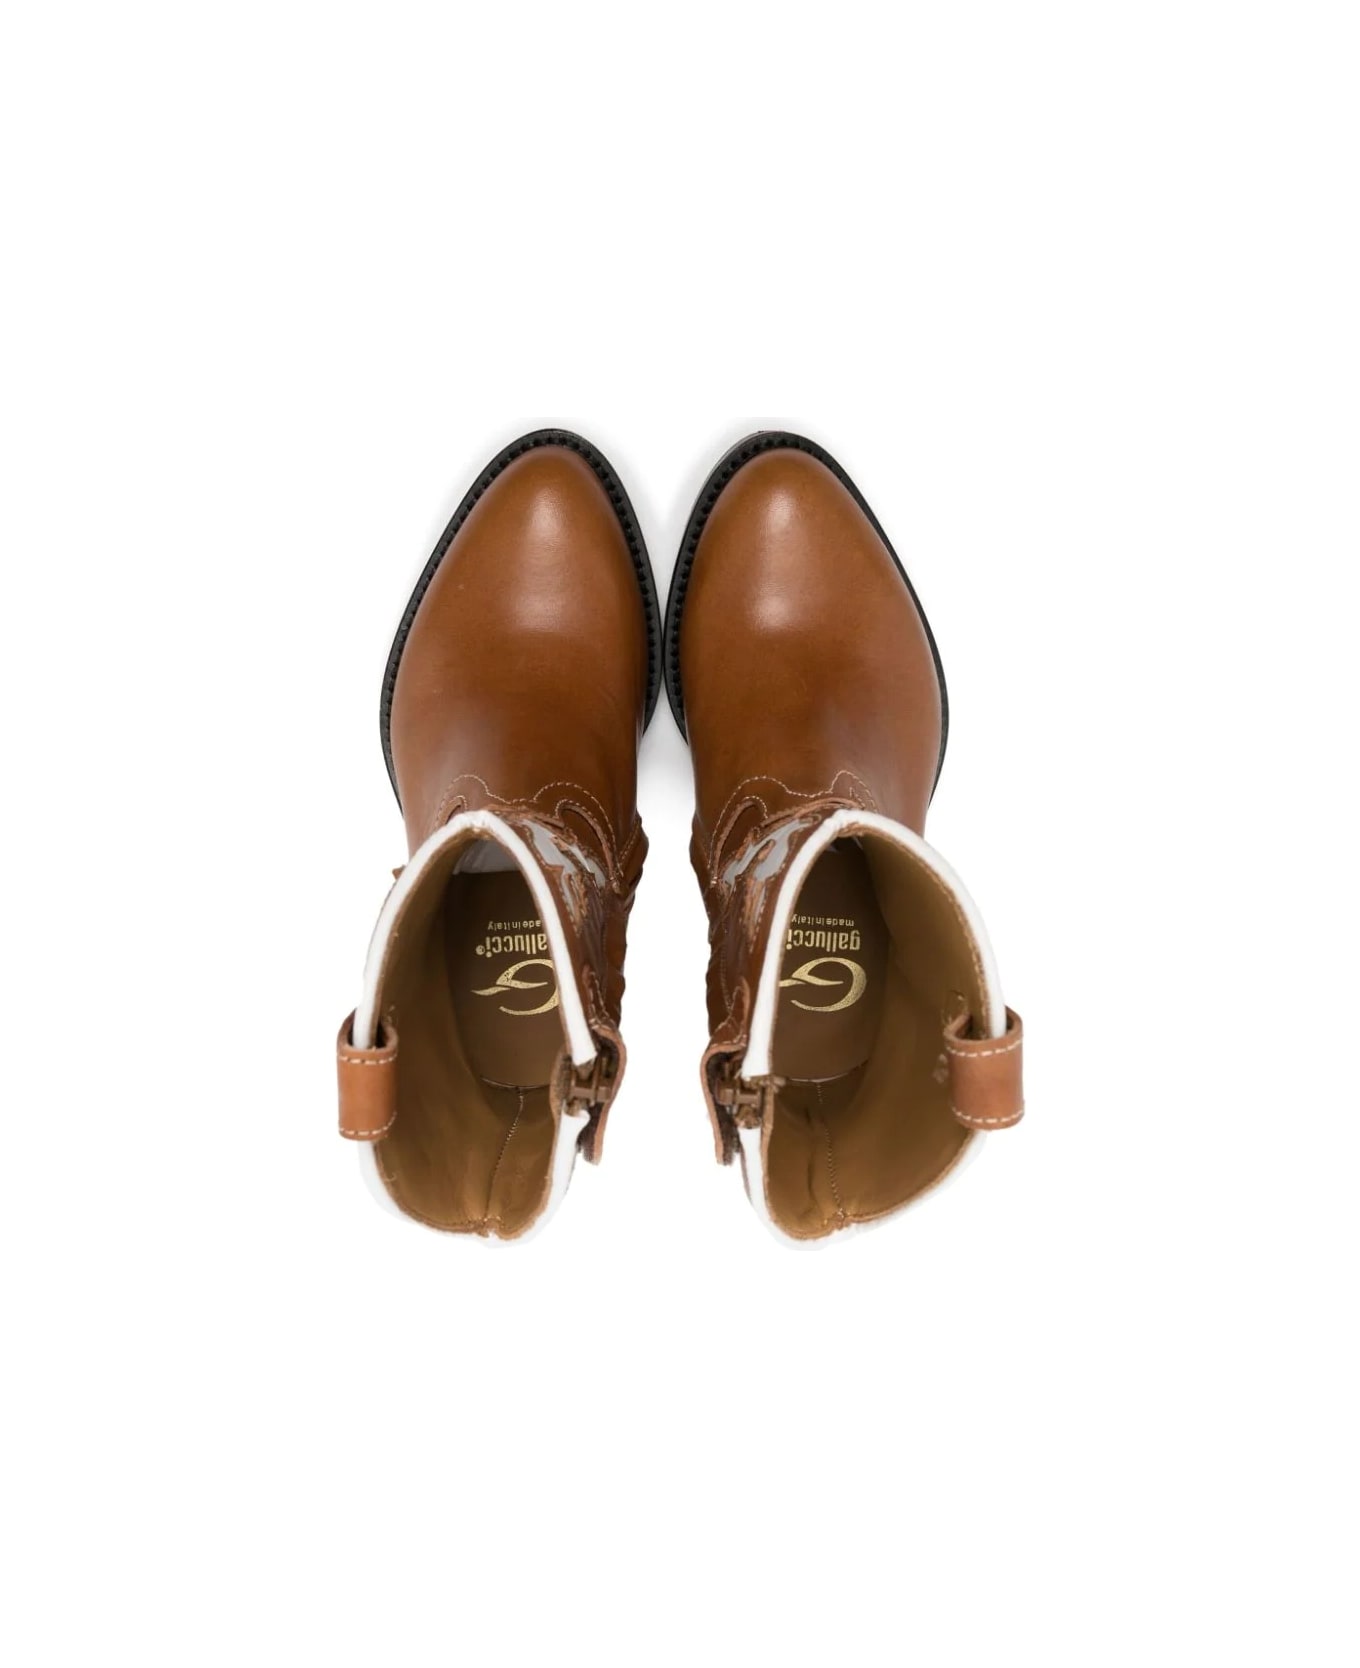 Gallucci Western Boots With Embroidery - Brown